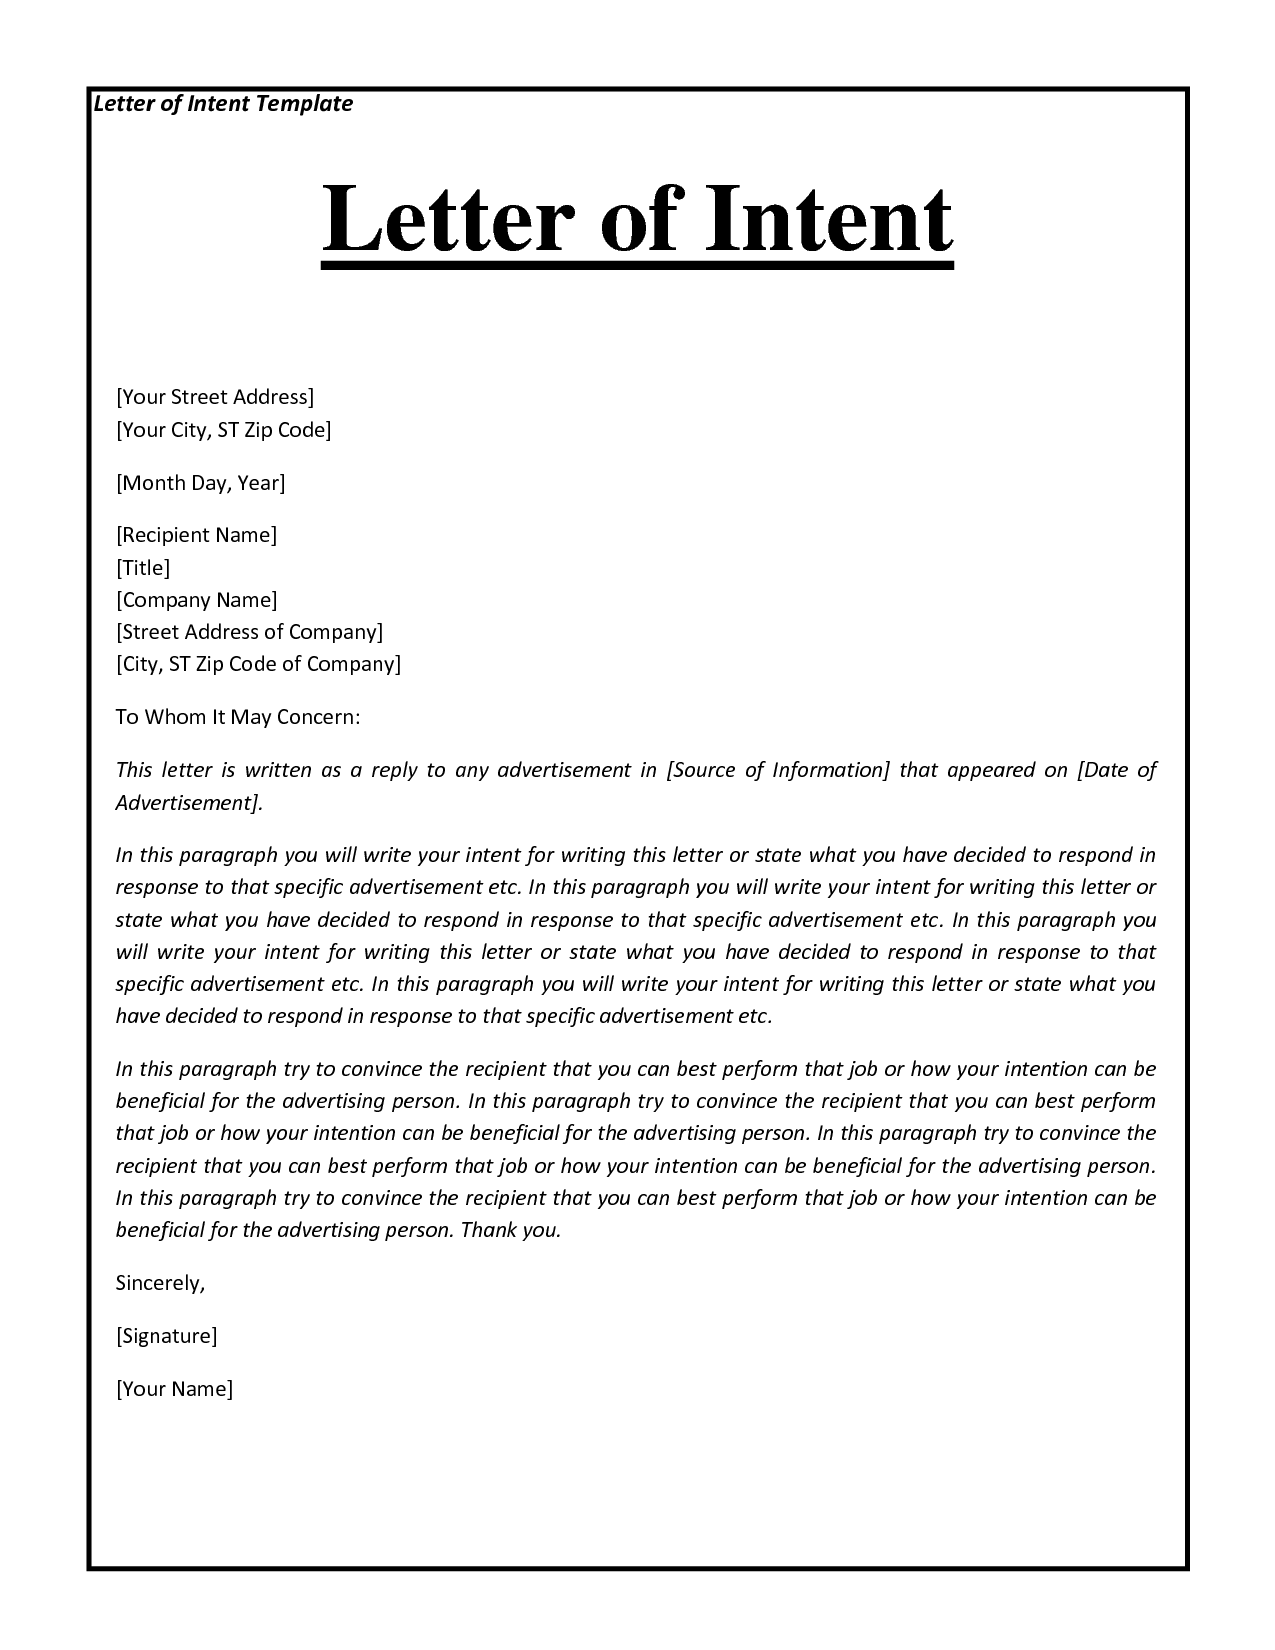 Contoh Letter Of Intent - Riset